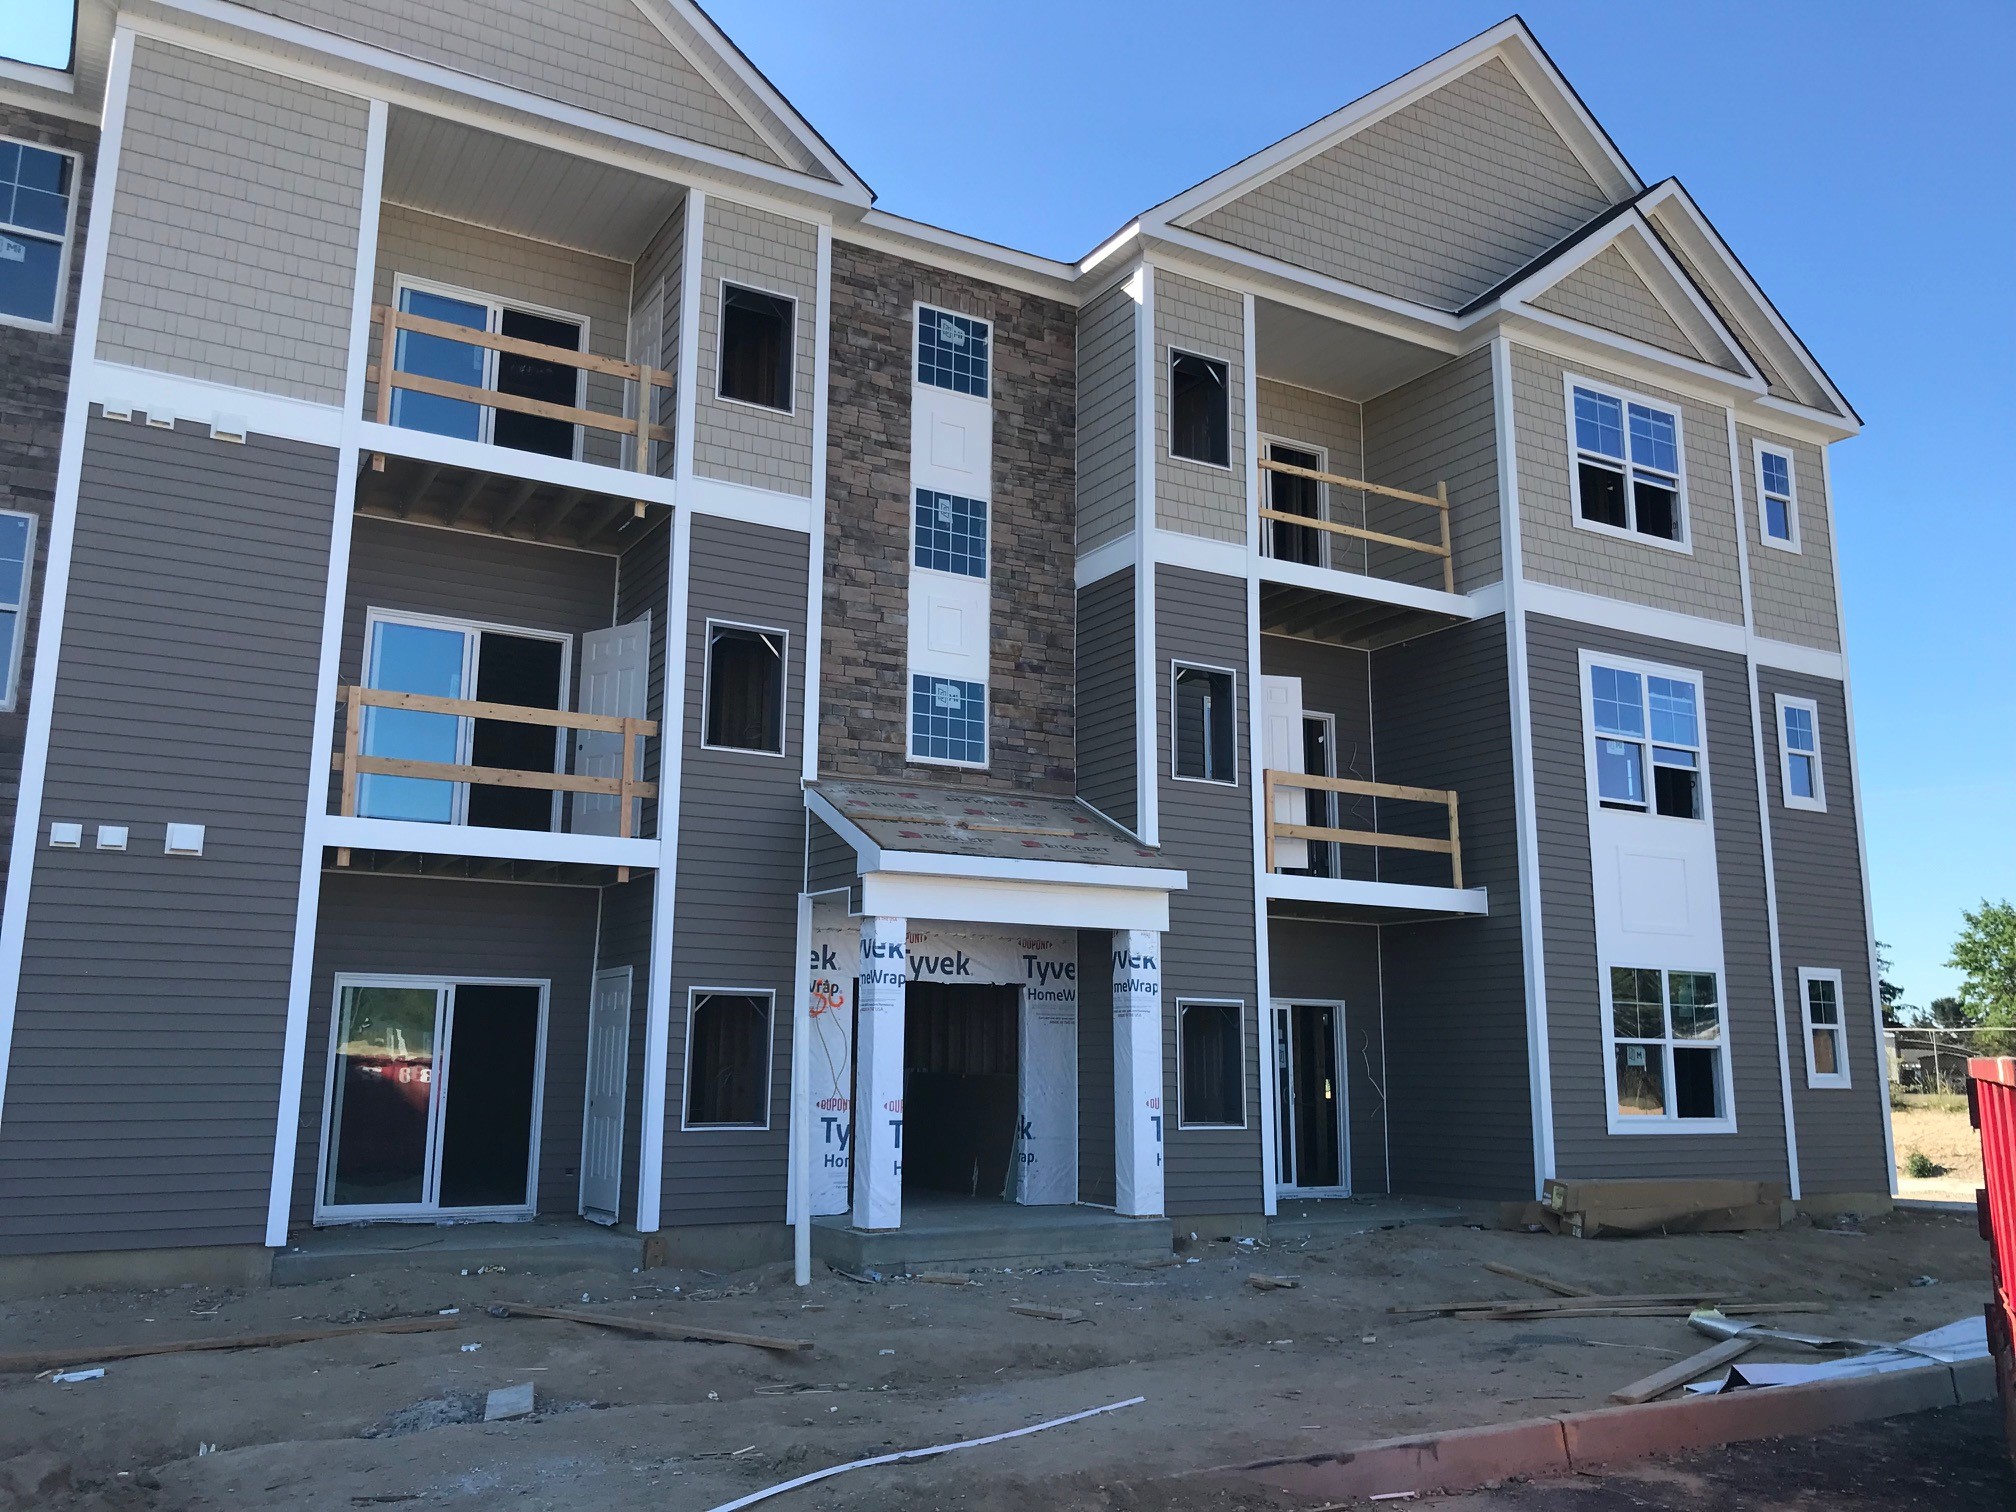 Continued progress at our Mi-Place at Brightmoor property!